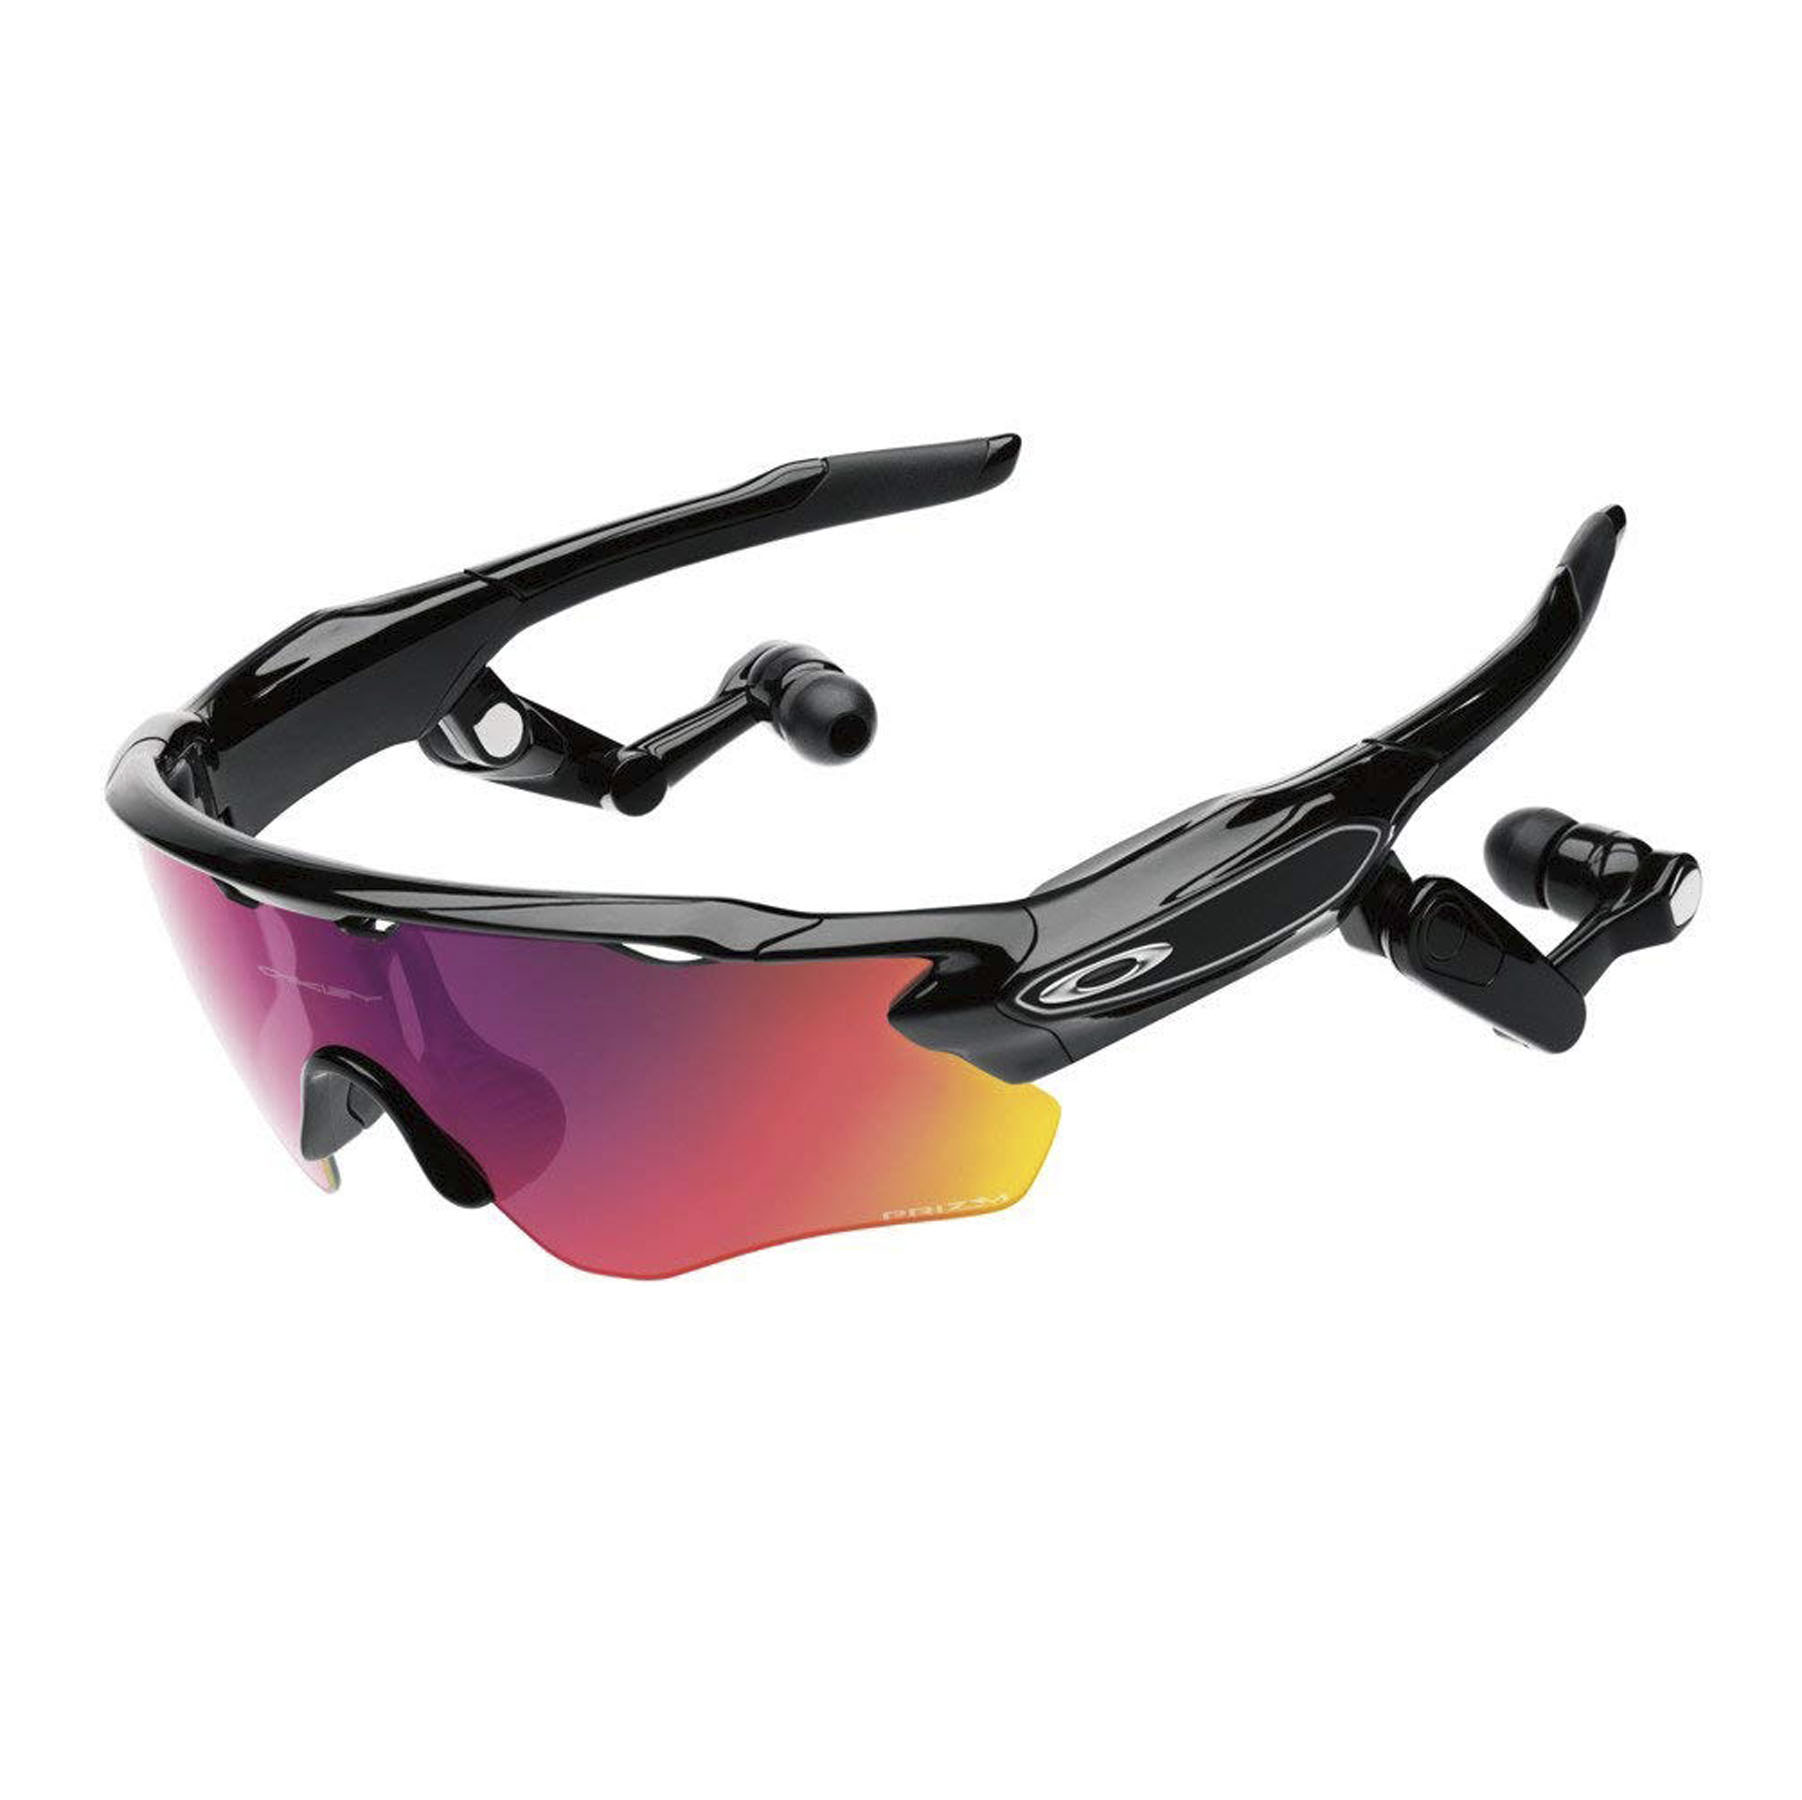 FRO Systems Sunglasses Pace Optic UV Protection SALE